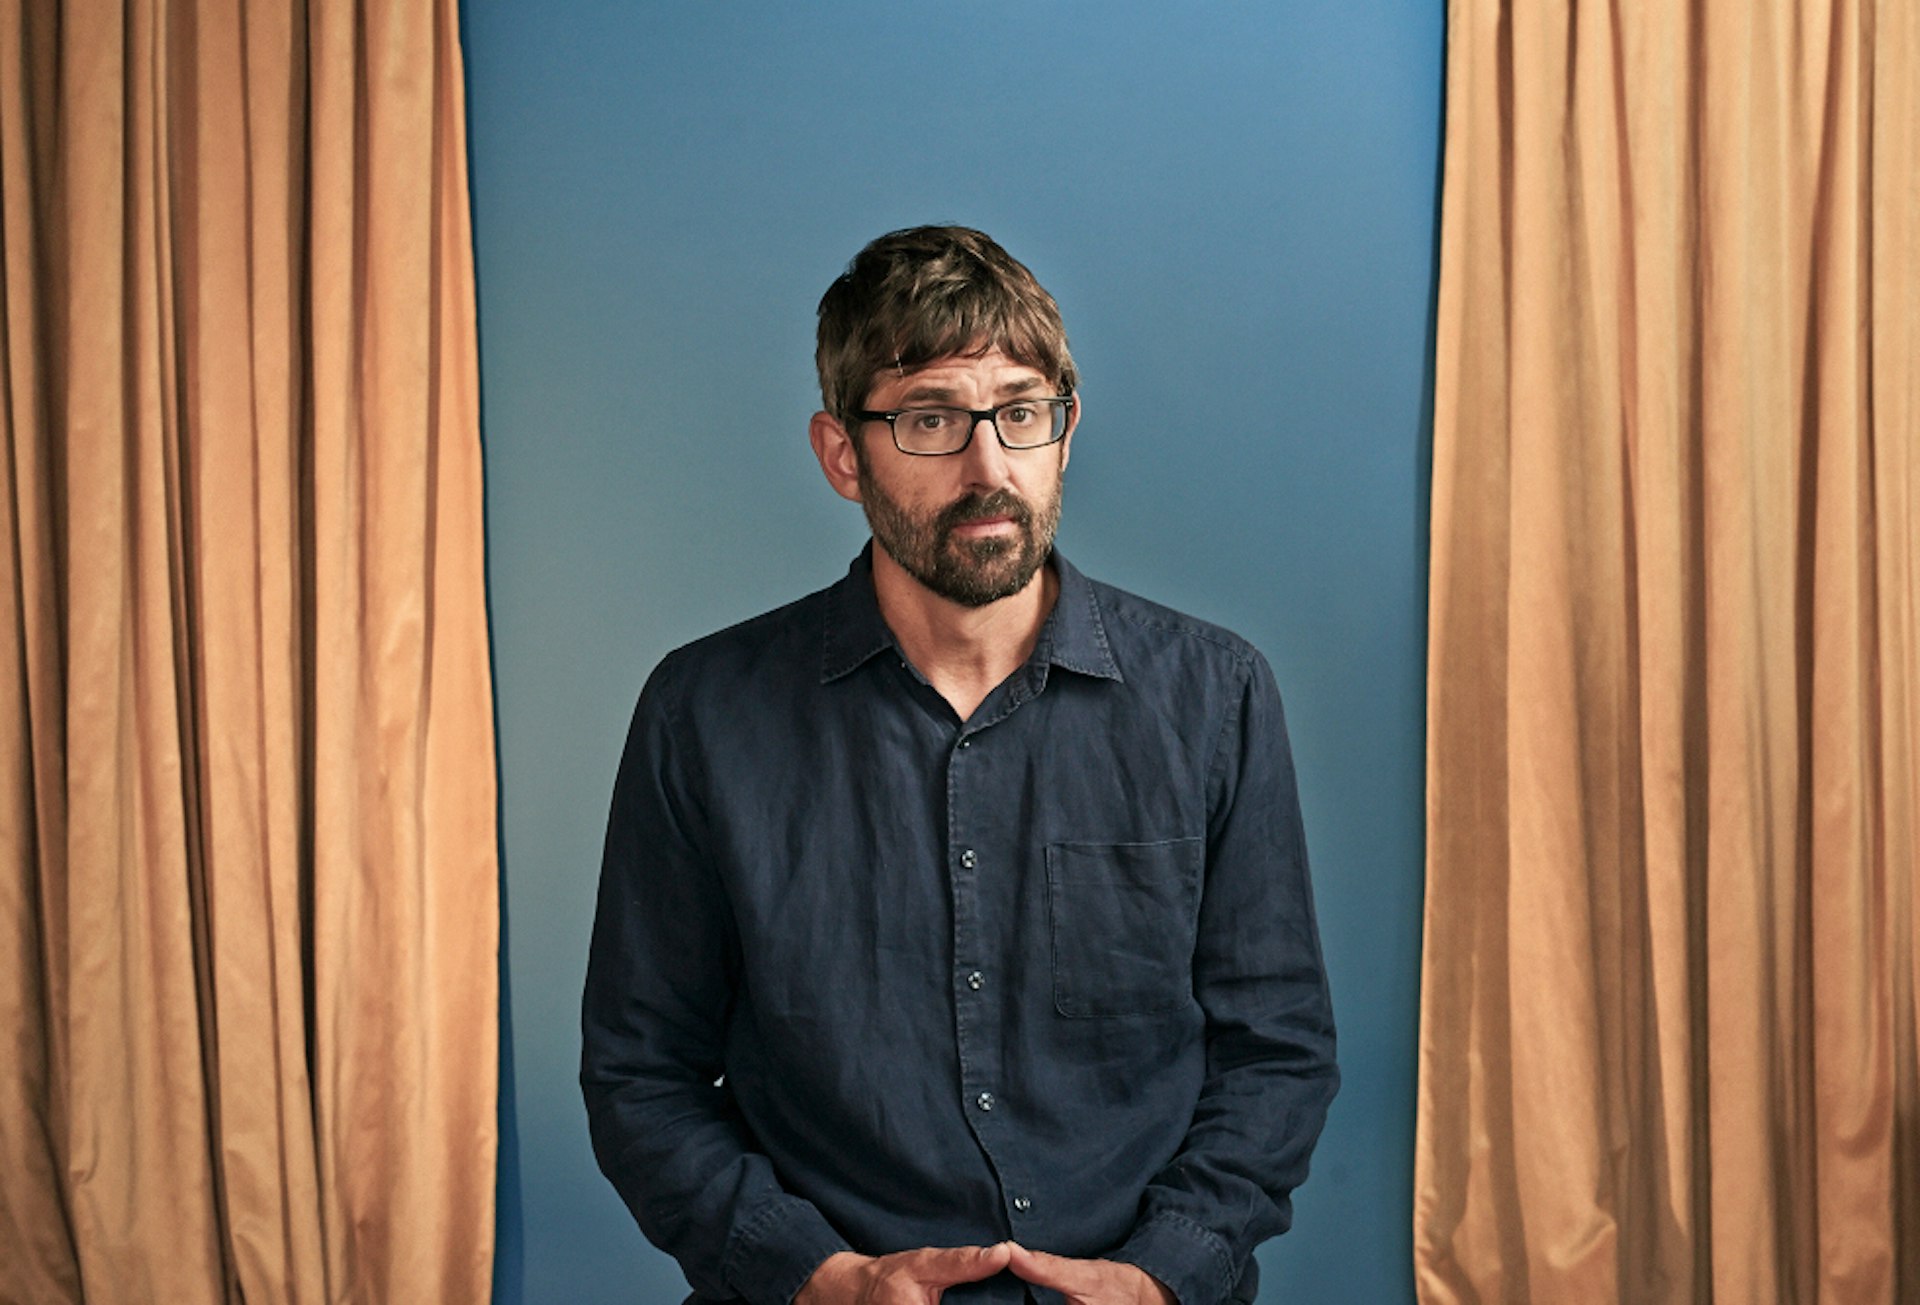 Louis Theroux on the life lessons that made his career